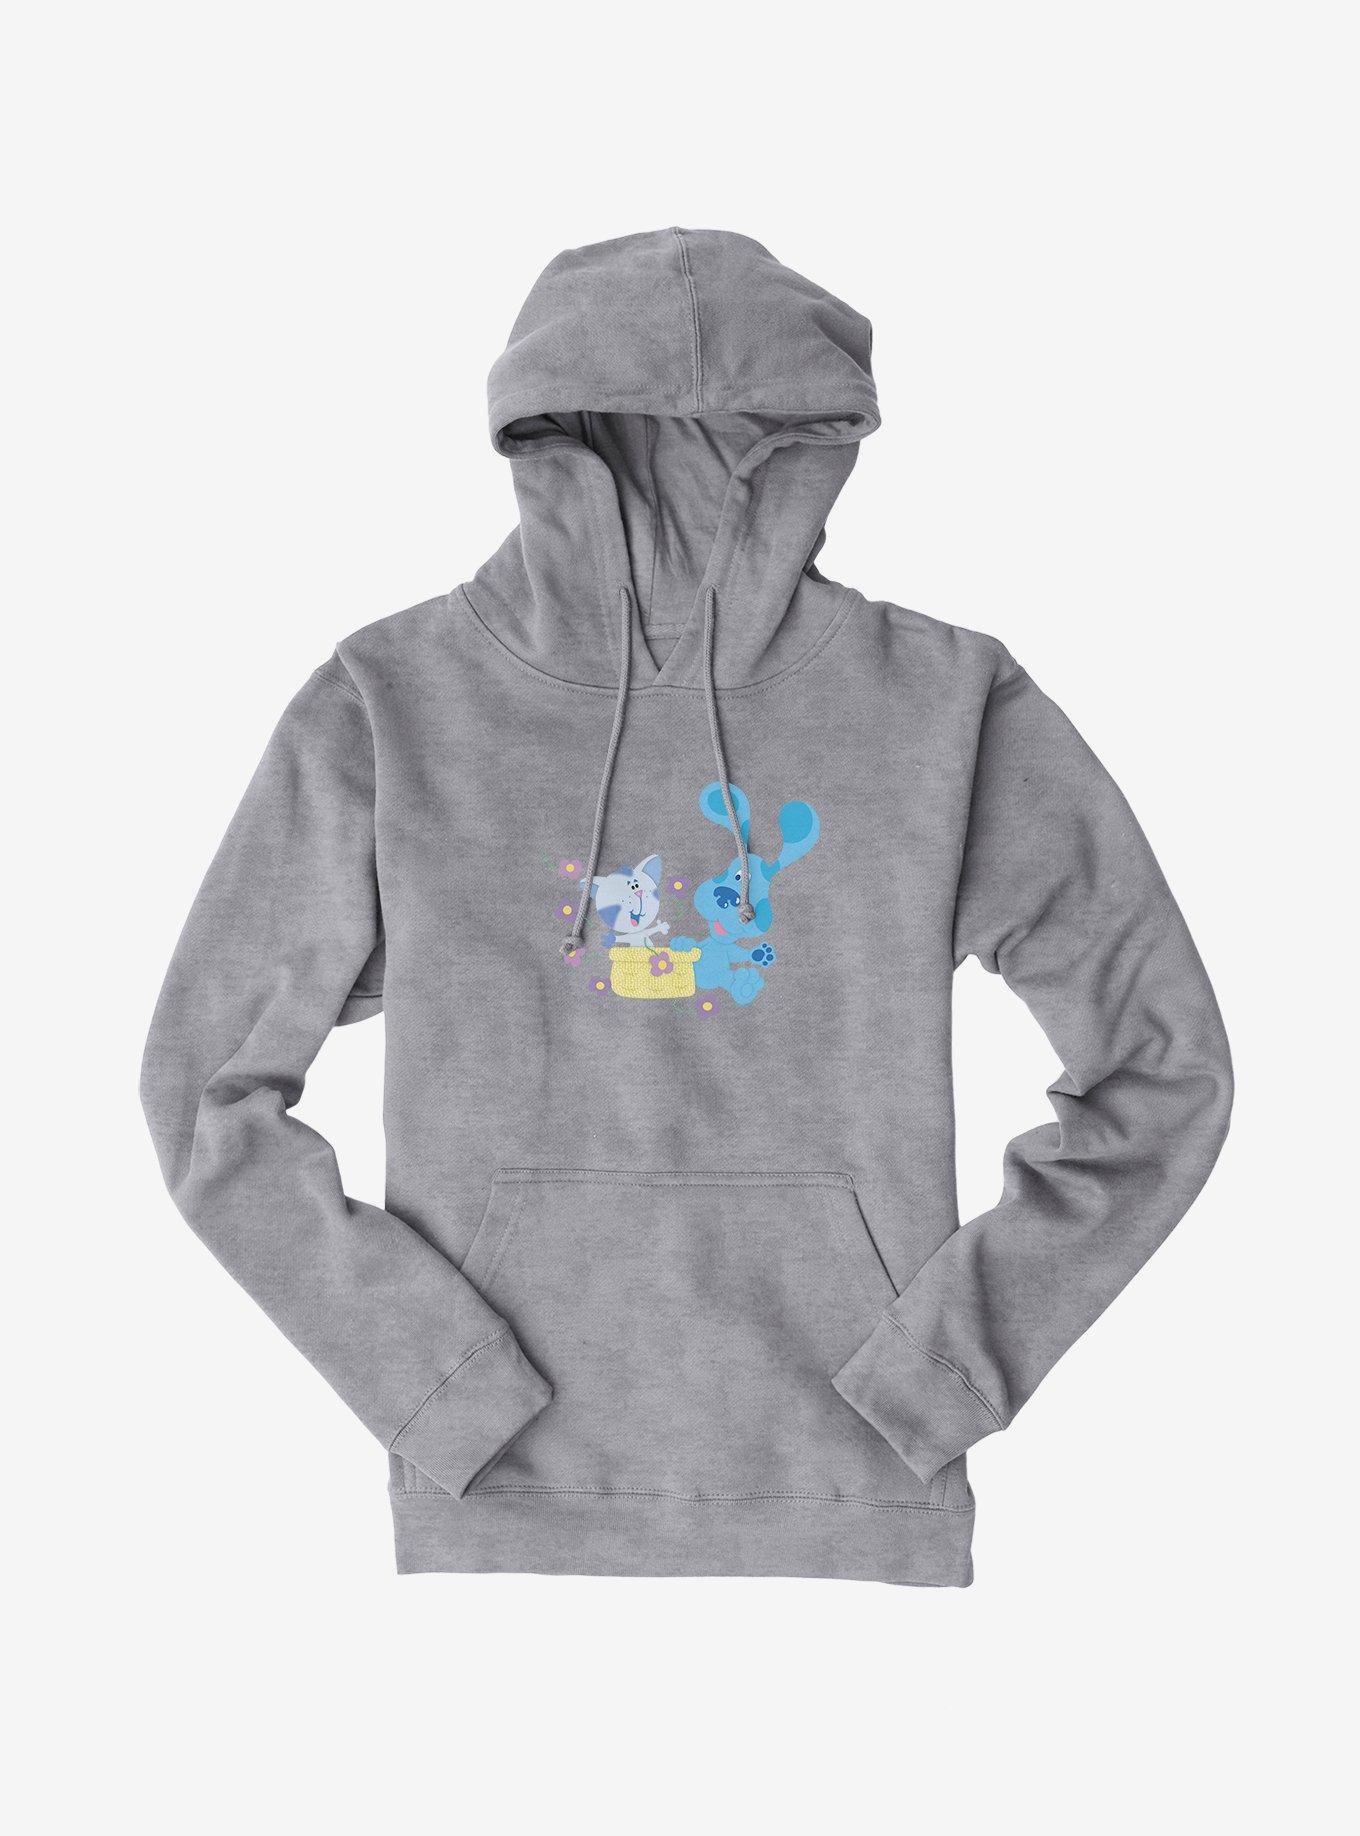 Blue's Clues Periwinkle And Blue Surprise Hoodie, HEATHER GREY, hi-res